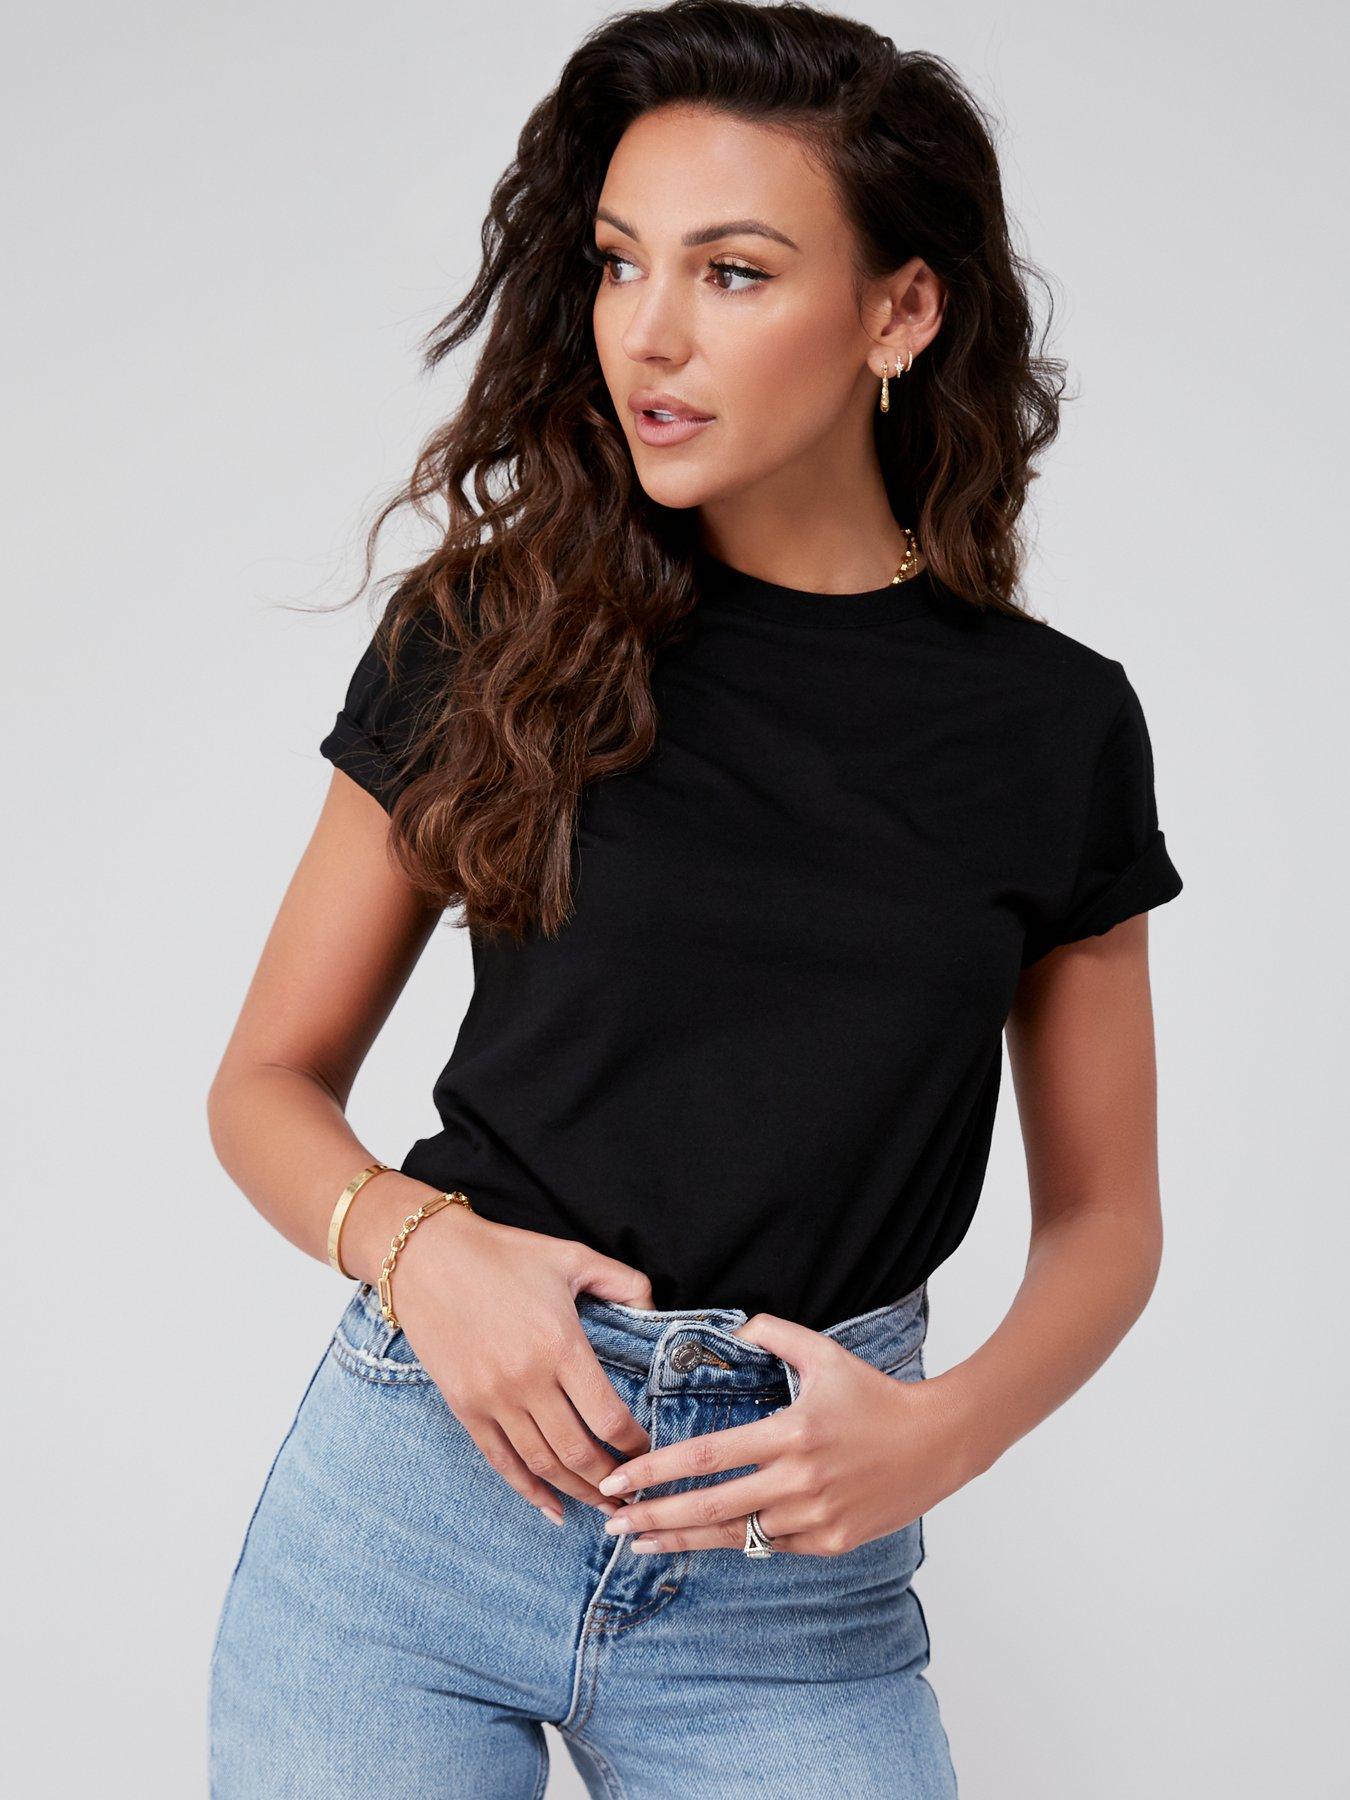 Black | Going Out Tops | T-Shirts | Michelle keegan | Women | www.very ...